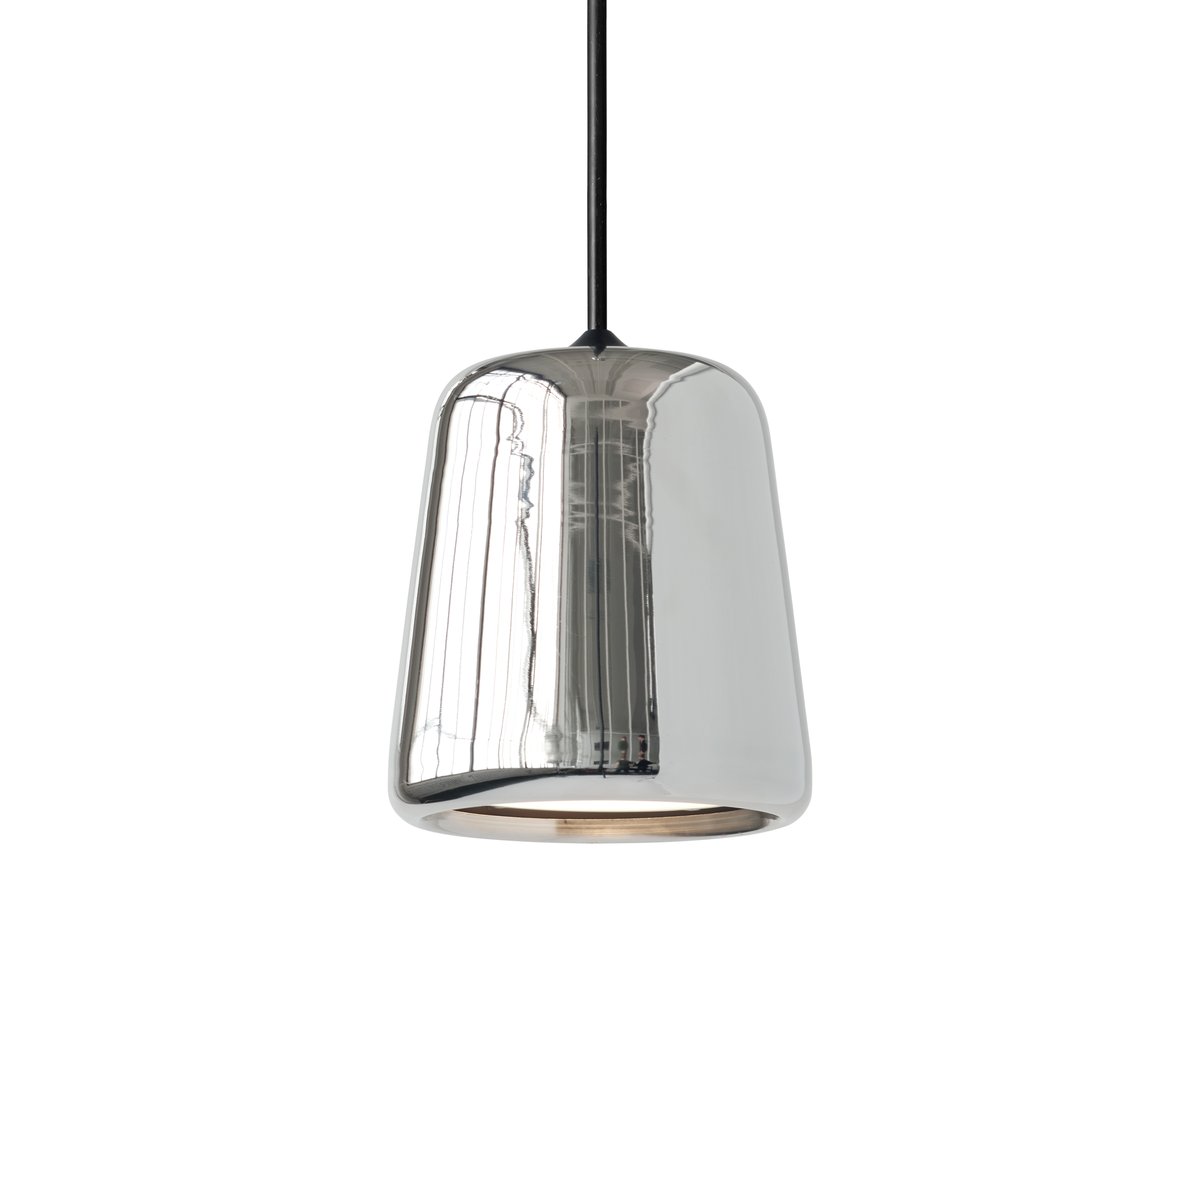 New Works Materiaal hanglamp Stainless steel